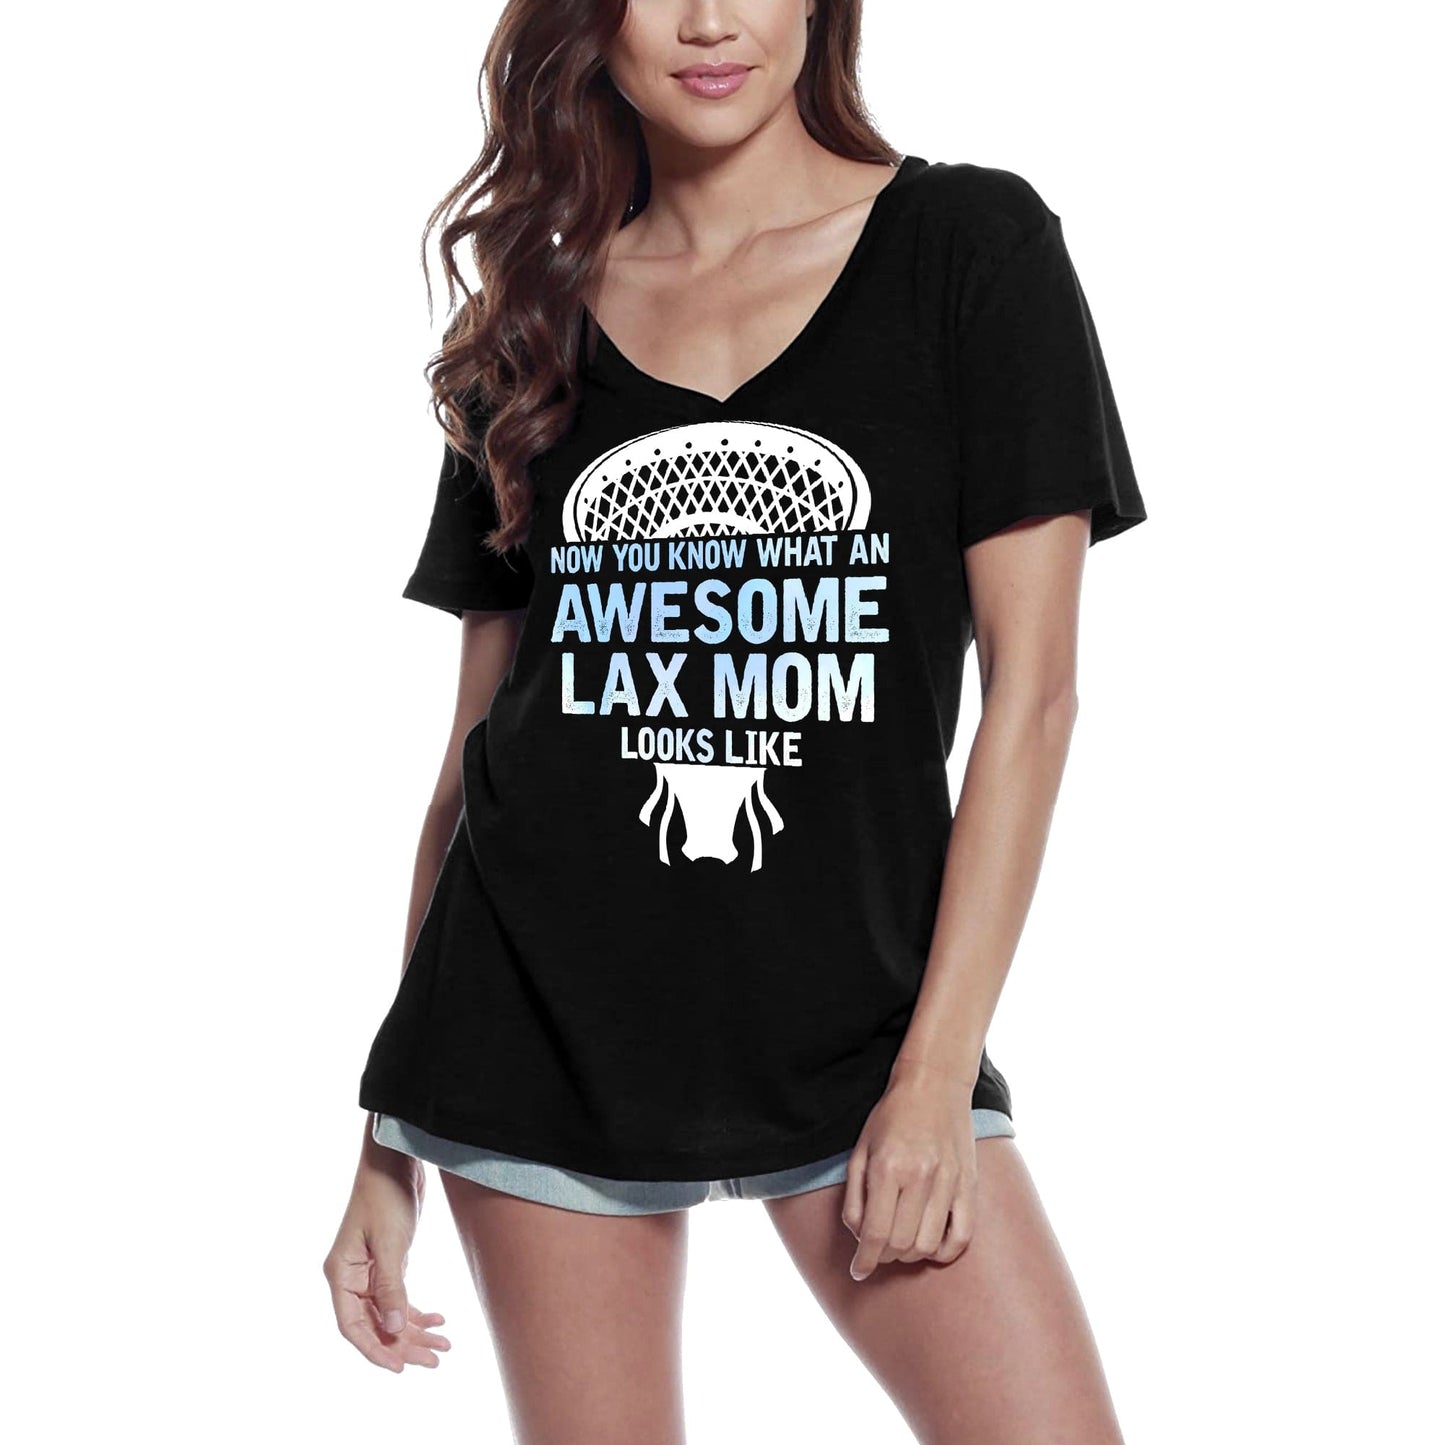 ULTRABASIC Women's T-Shirt Now You Know What an Awesome Lax Mom Looks Like - Lacrosse Mother Tee Shirt